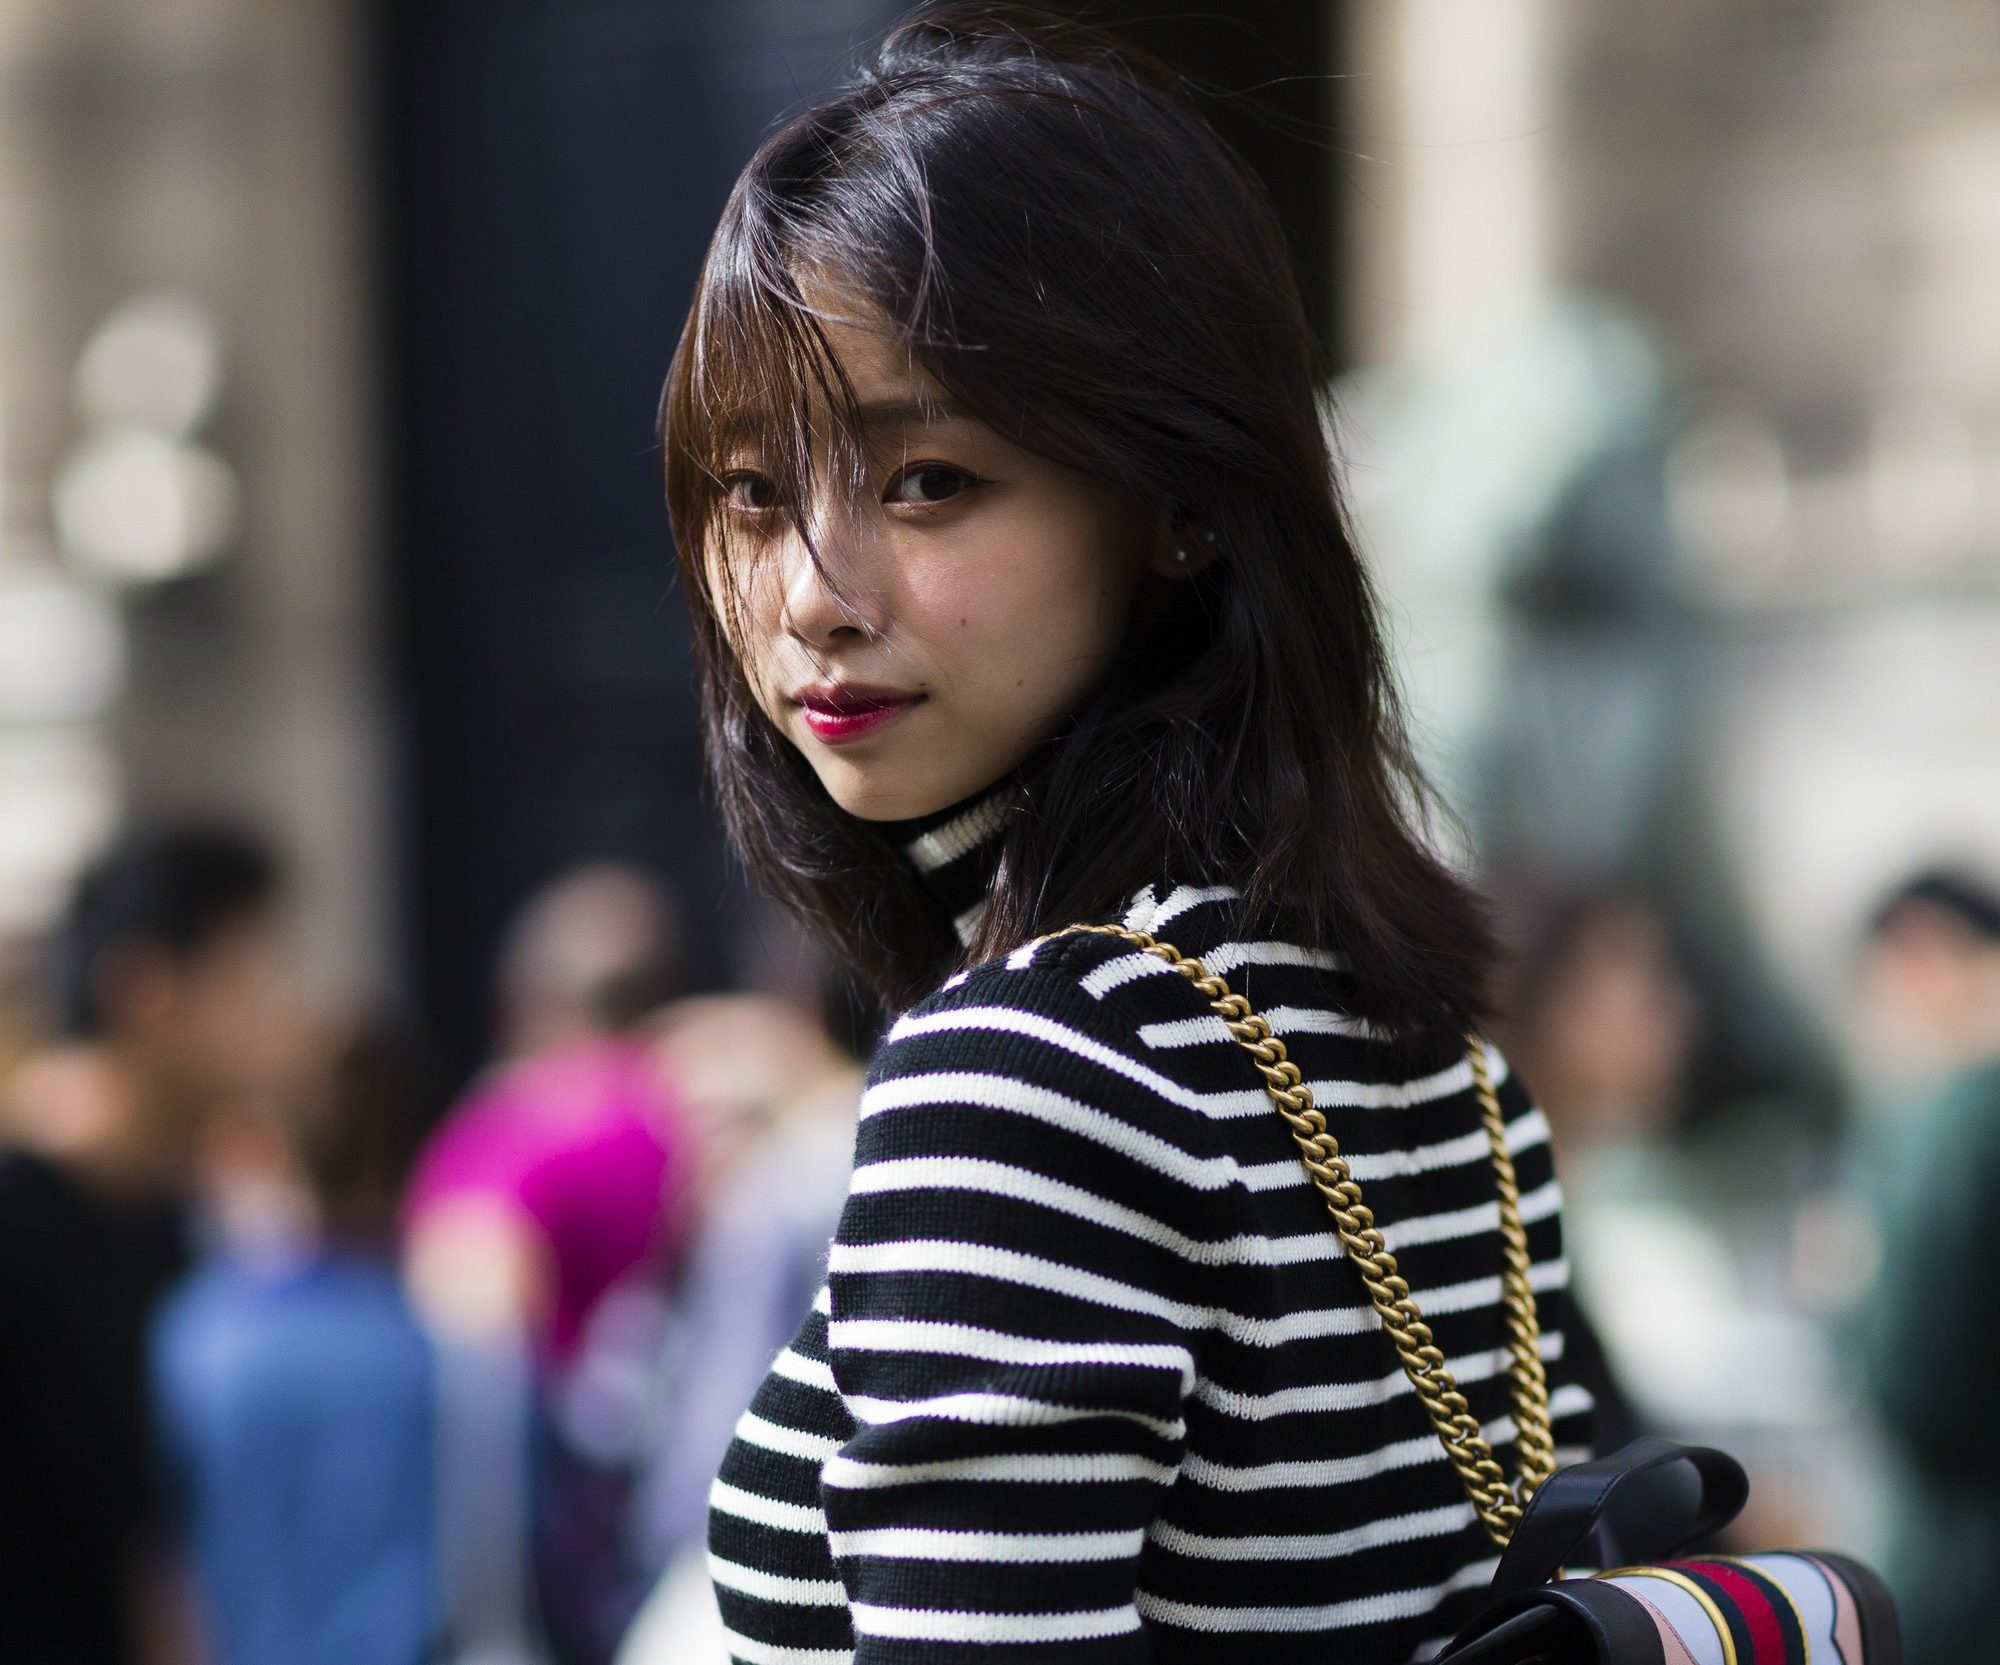 streetstyle shot with woman with lob hairstyle in striped shirt